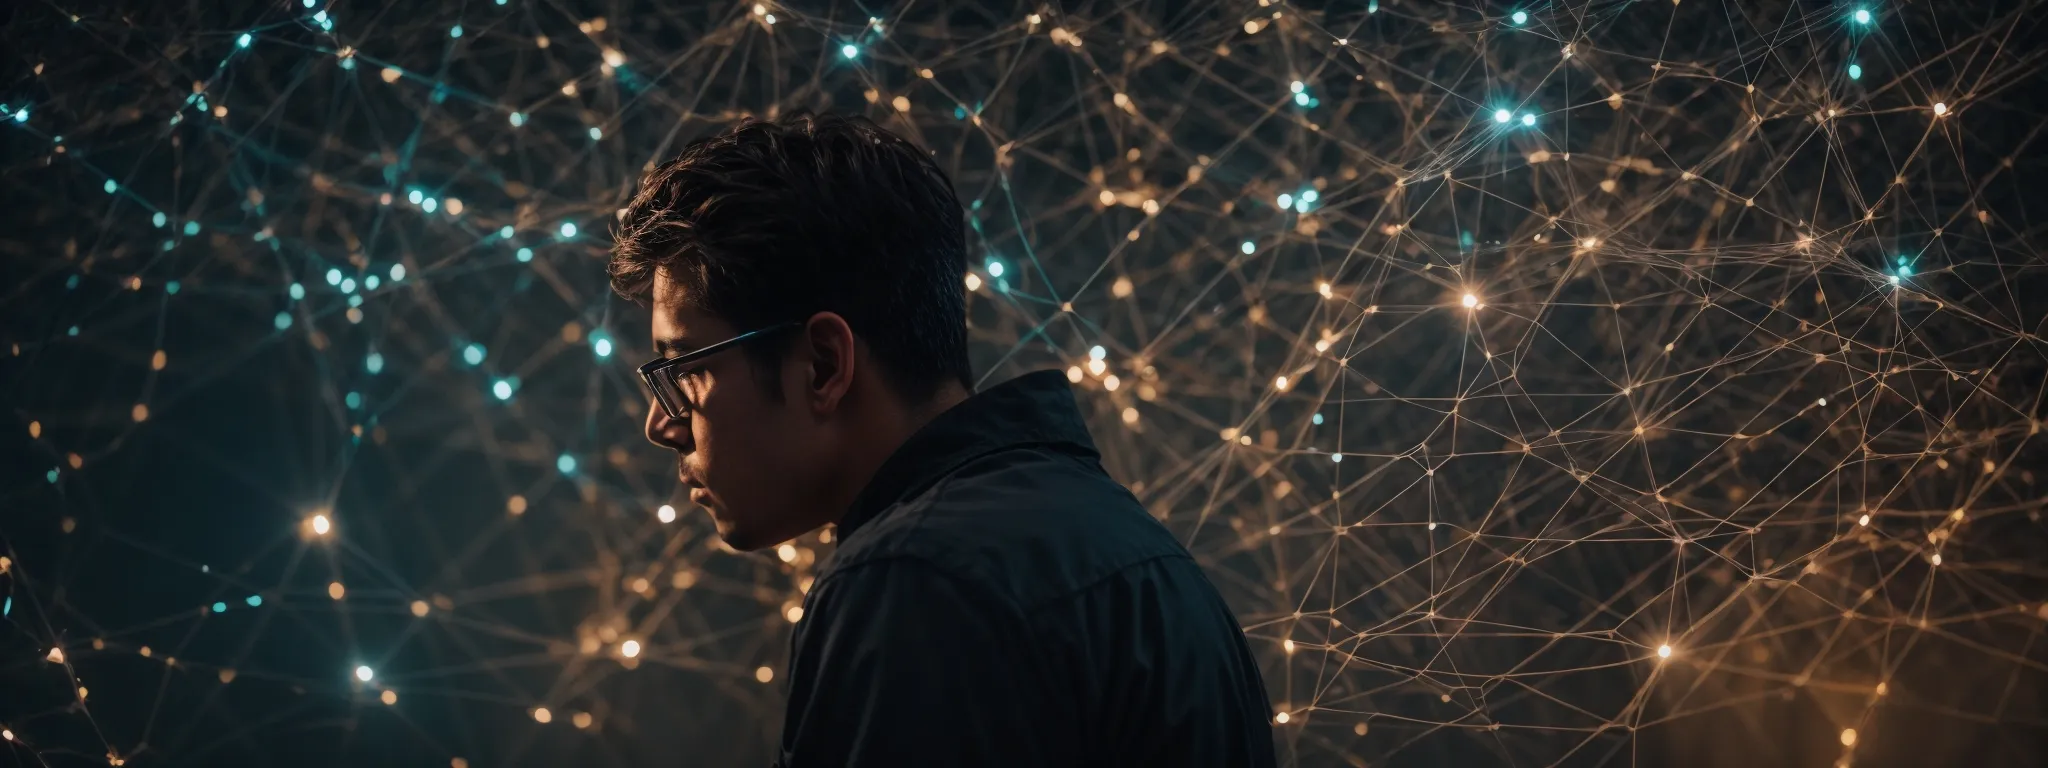 a webmaster is intently examining a complex network of interconnected nodes representing websites engaging in strategic link building.